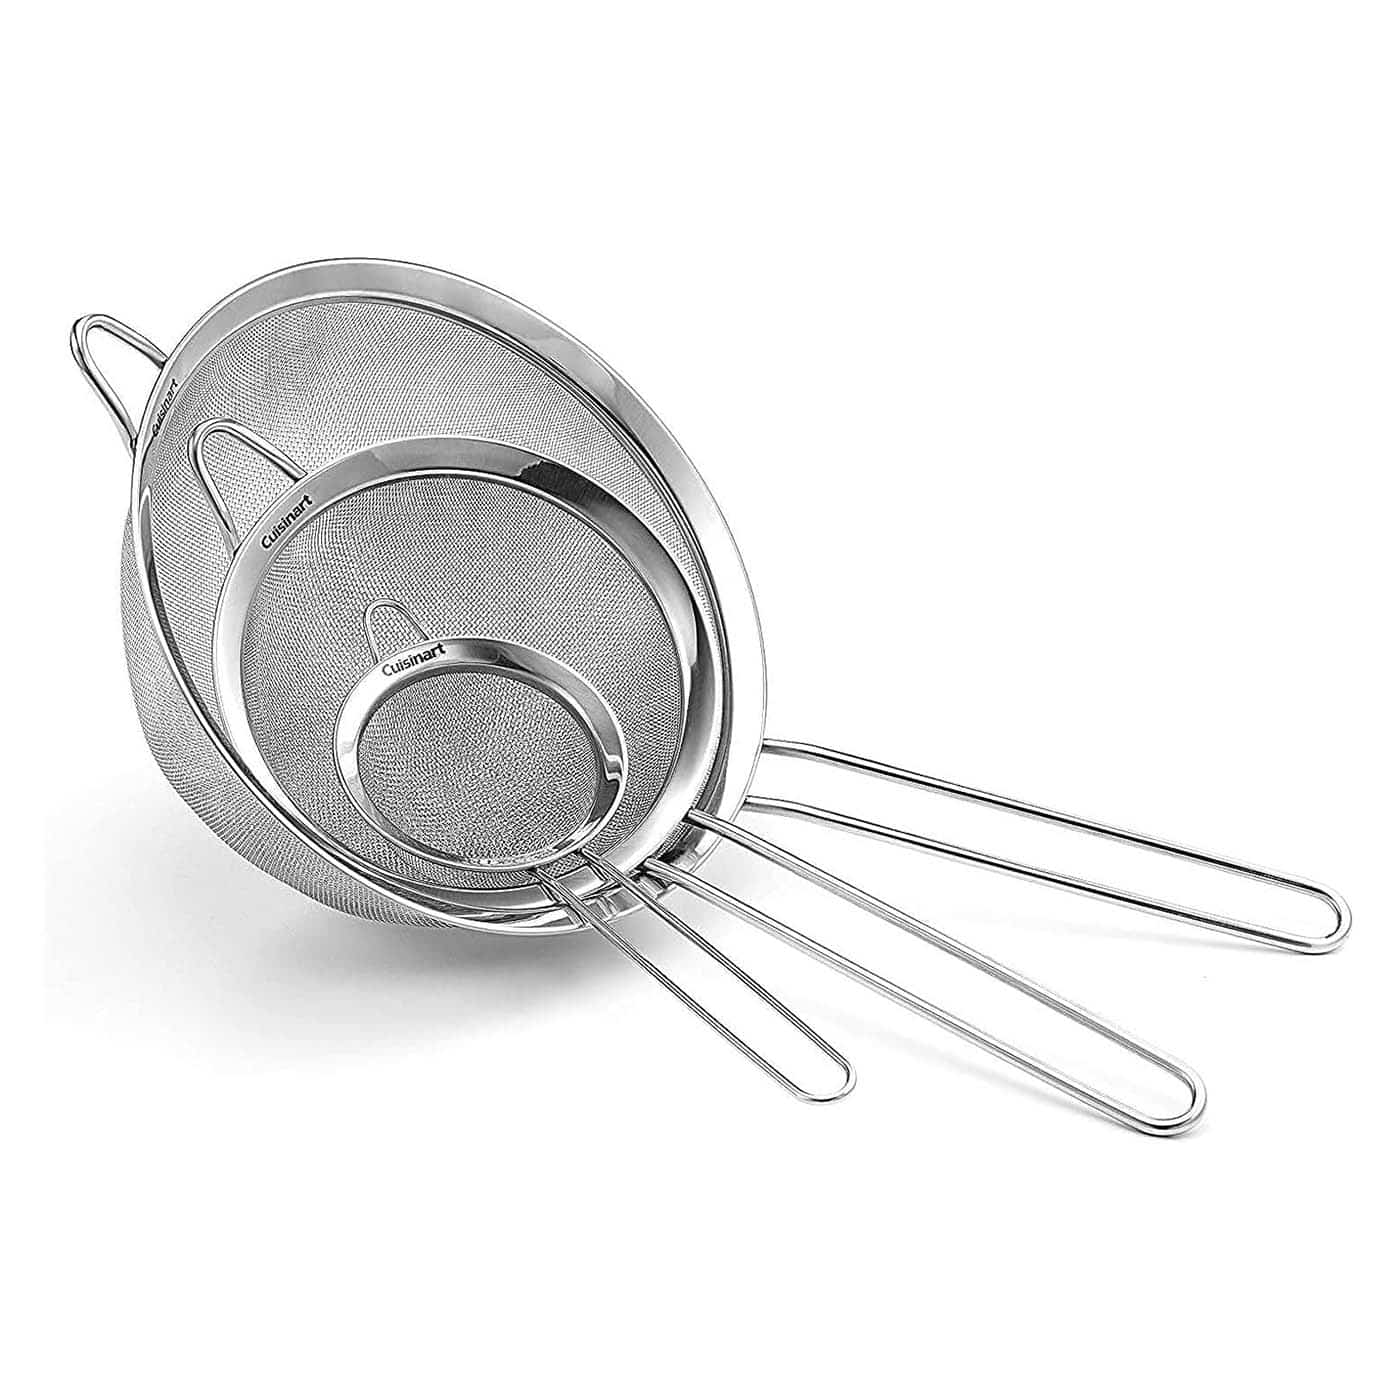 Stainless Mesh Strainers, Set for 3